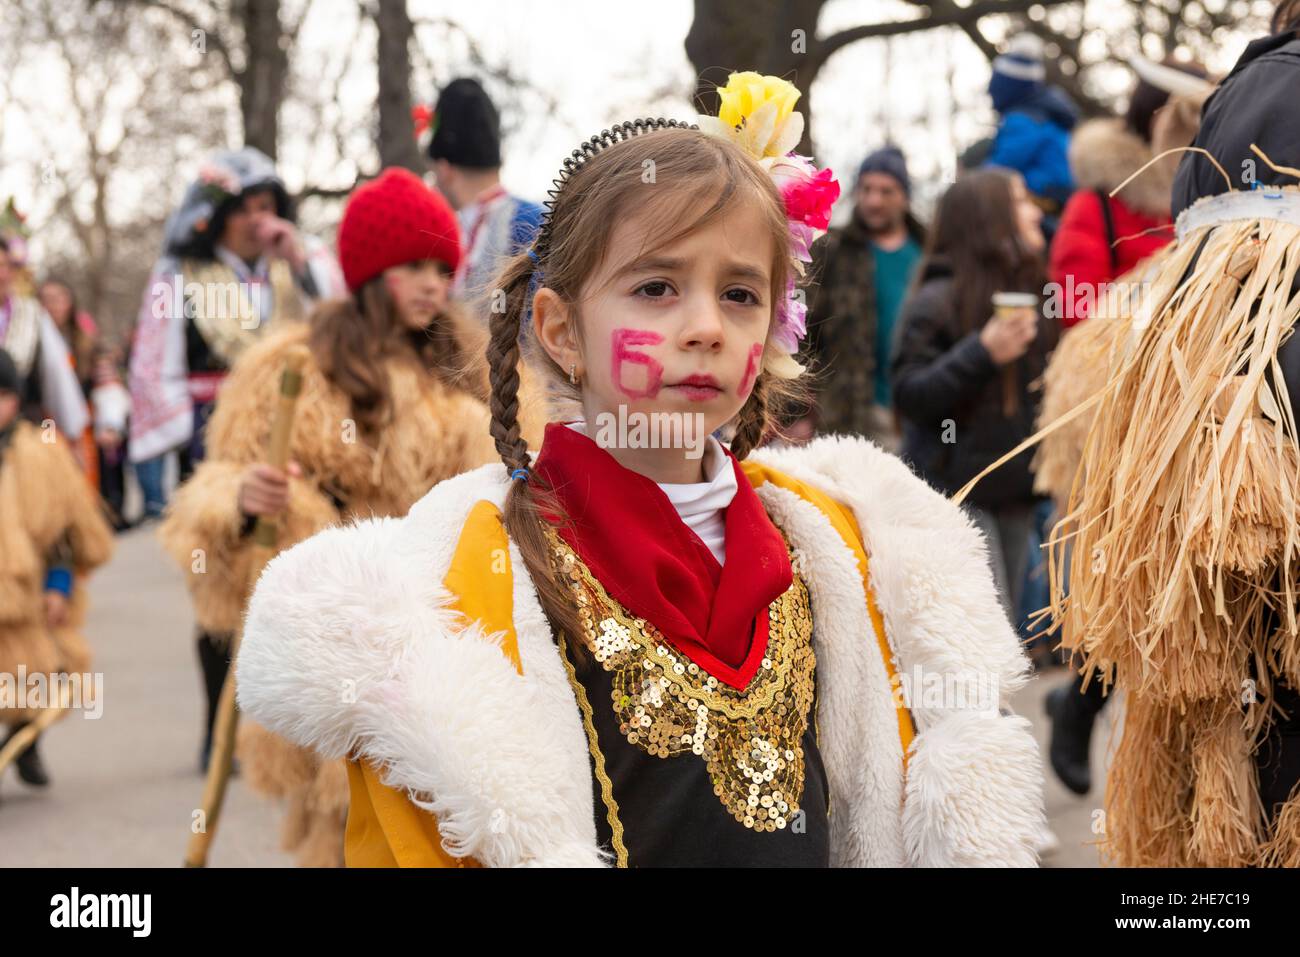 Bulgarian child. Kukeri little girl dancer with intricate costume at the traditional annual festival. Kukeri is a centuries-old tradition intended to chase evil spirits away and to invite good, held around early winter or midwinter. Stock Photo